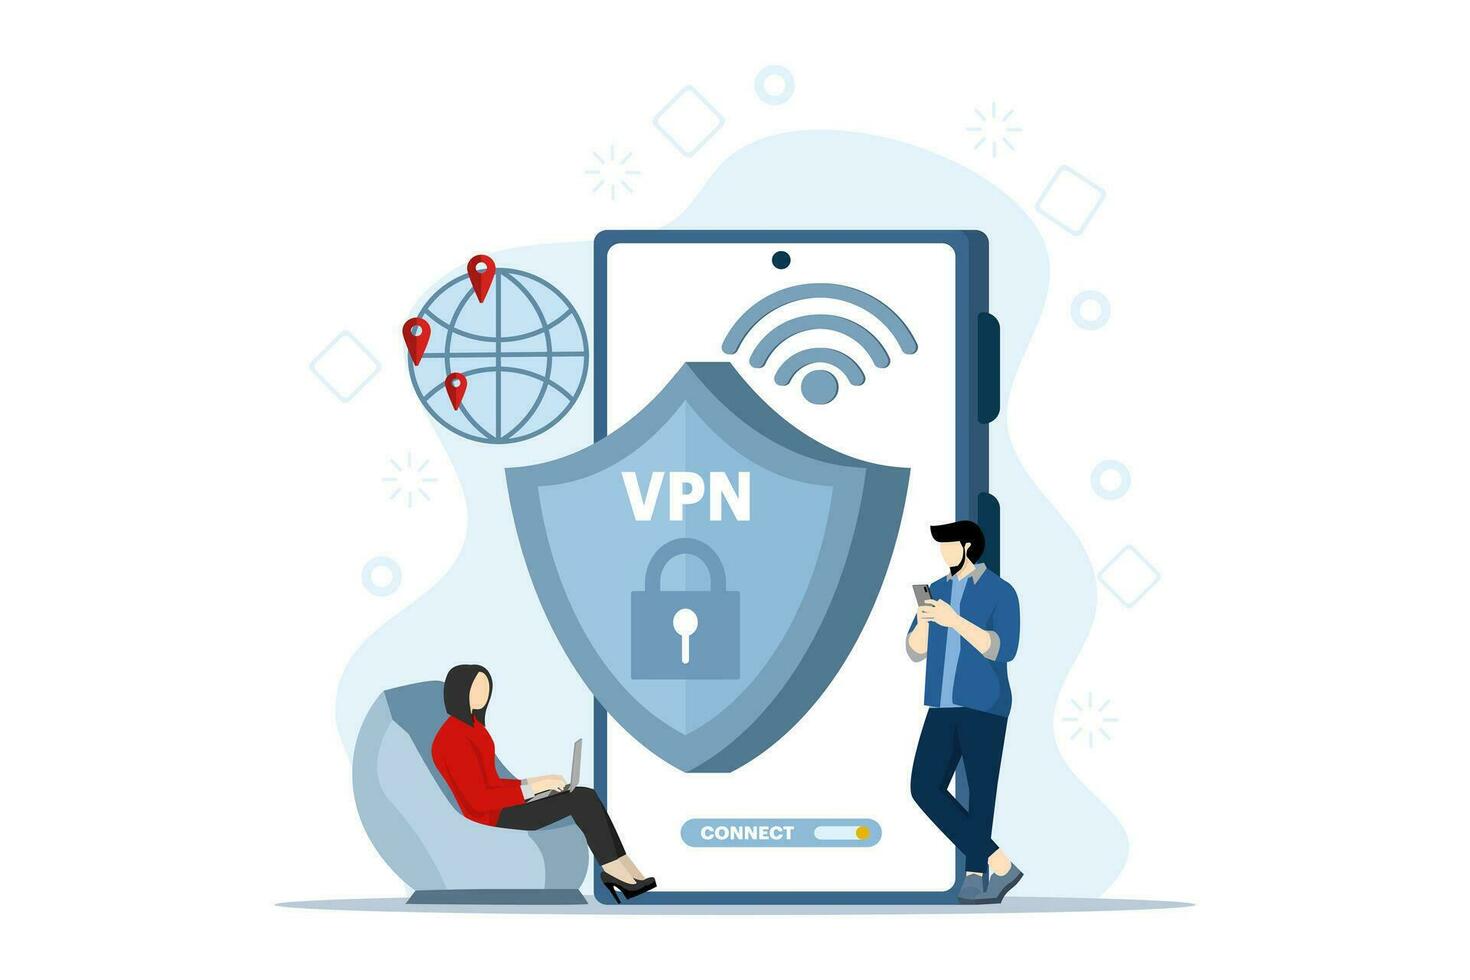 Virtual Private Network Concept. People Use VPN Technology System to Protect their Personal Data on Smartphones, vpn technology system, browser unblock websites, internet connection. vector